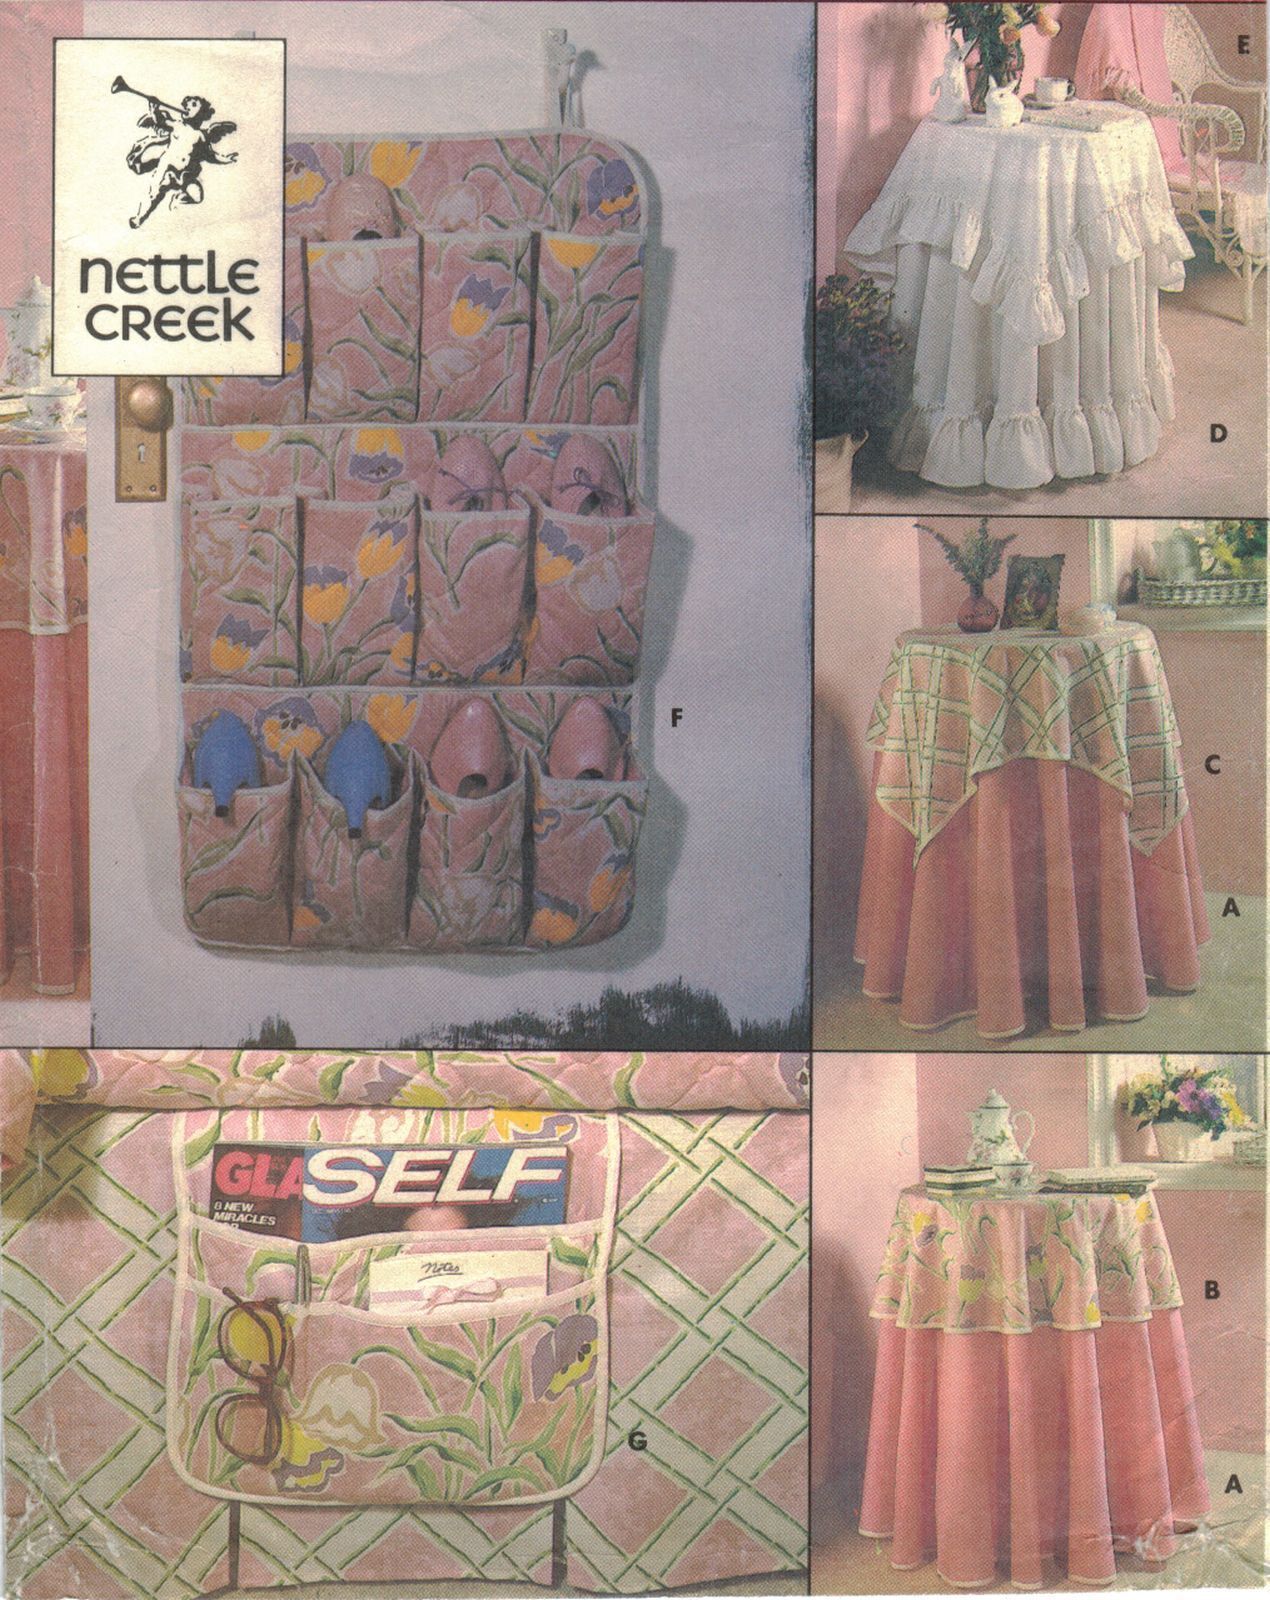 Vintage Nettle Creek Round Square Tablecloths Shoe Bag Bed Caddy Sew Pattern - $14.99